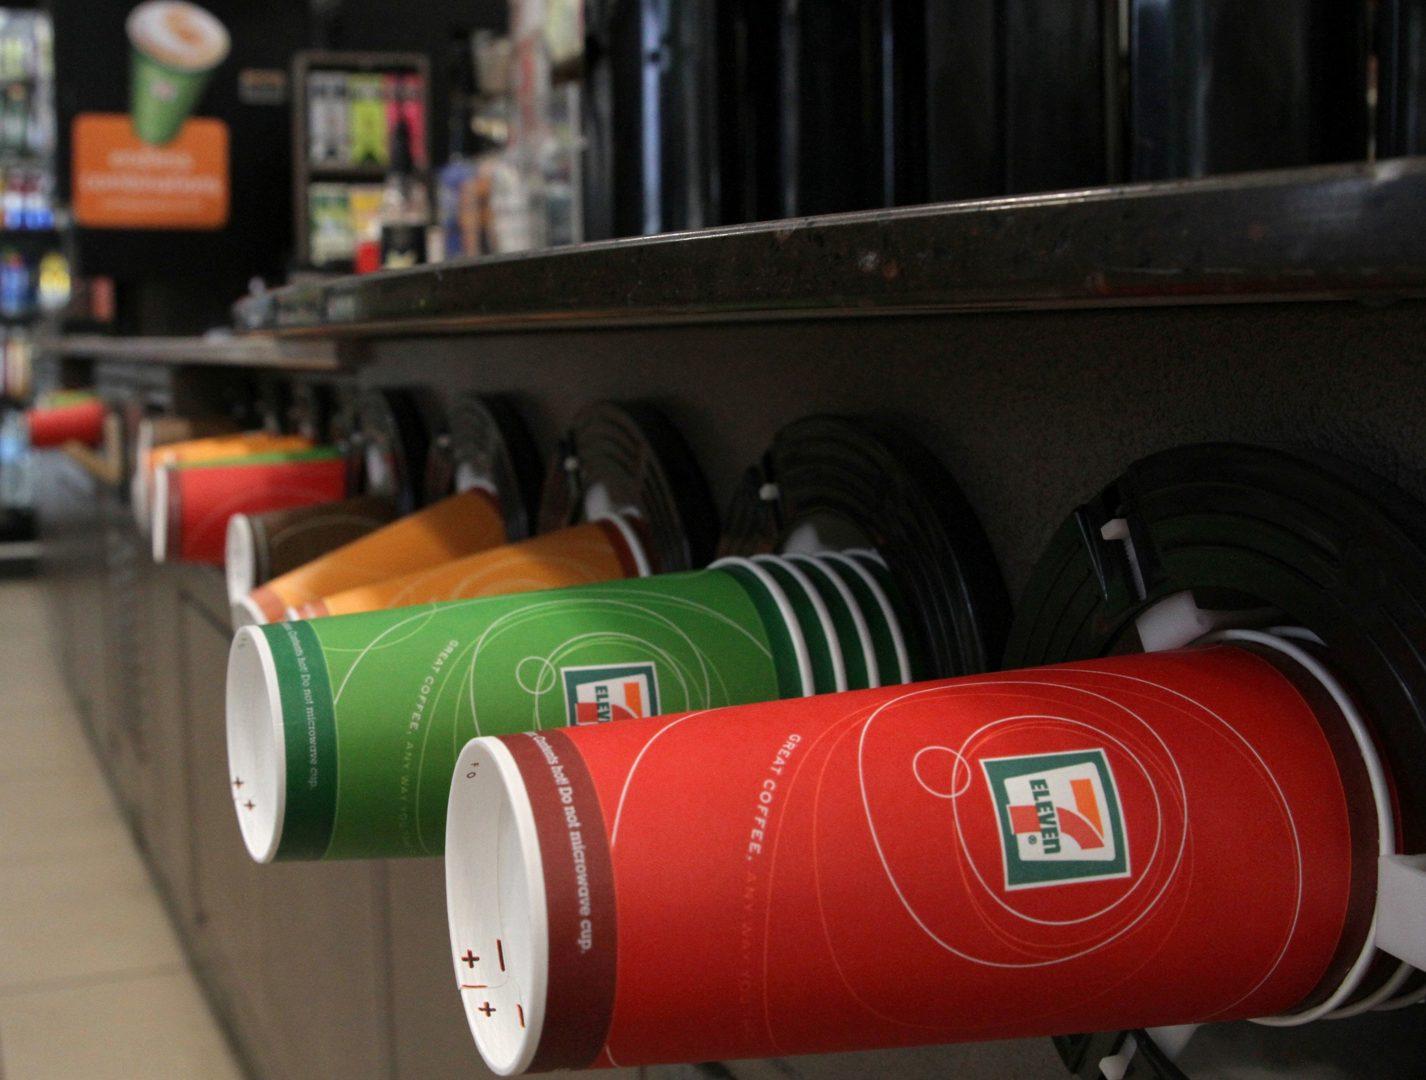 7-Elevens+BYO+Cup+Day+takes+place+Saturday+in+all+of+the+convenience+store+chains+locations.+%0A%28Erin+Kirkland%2FBaltimore+Sun%2FTNS%29